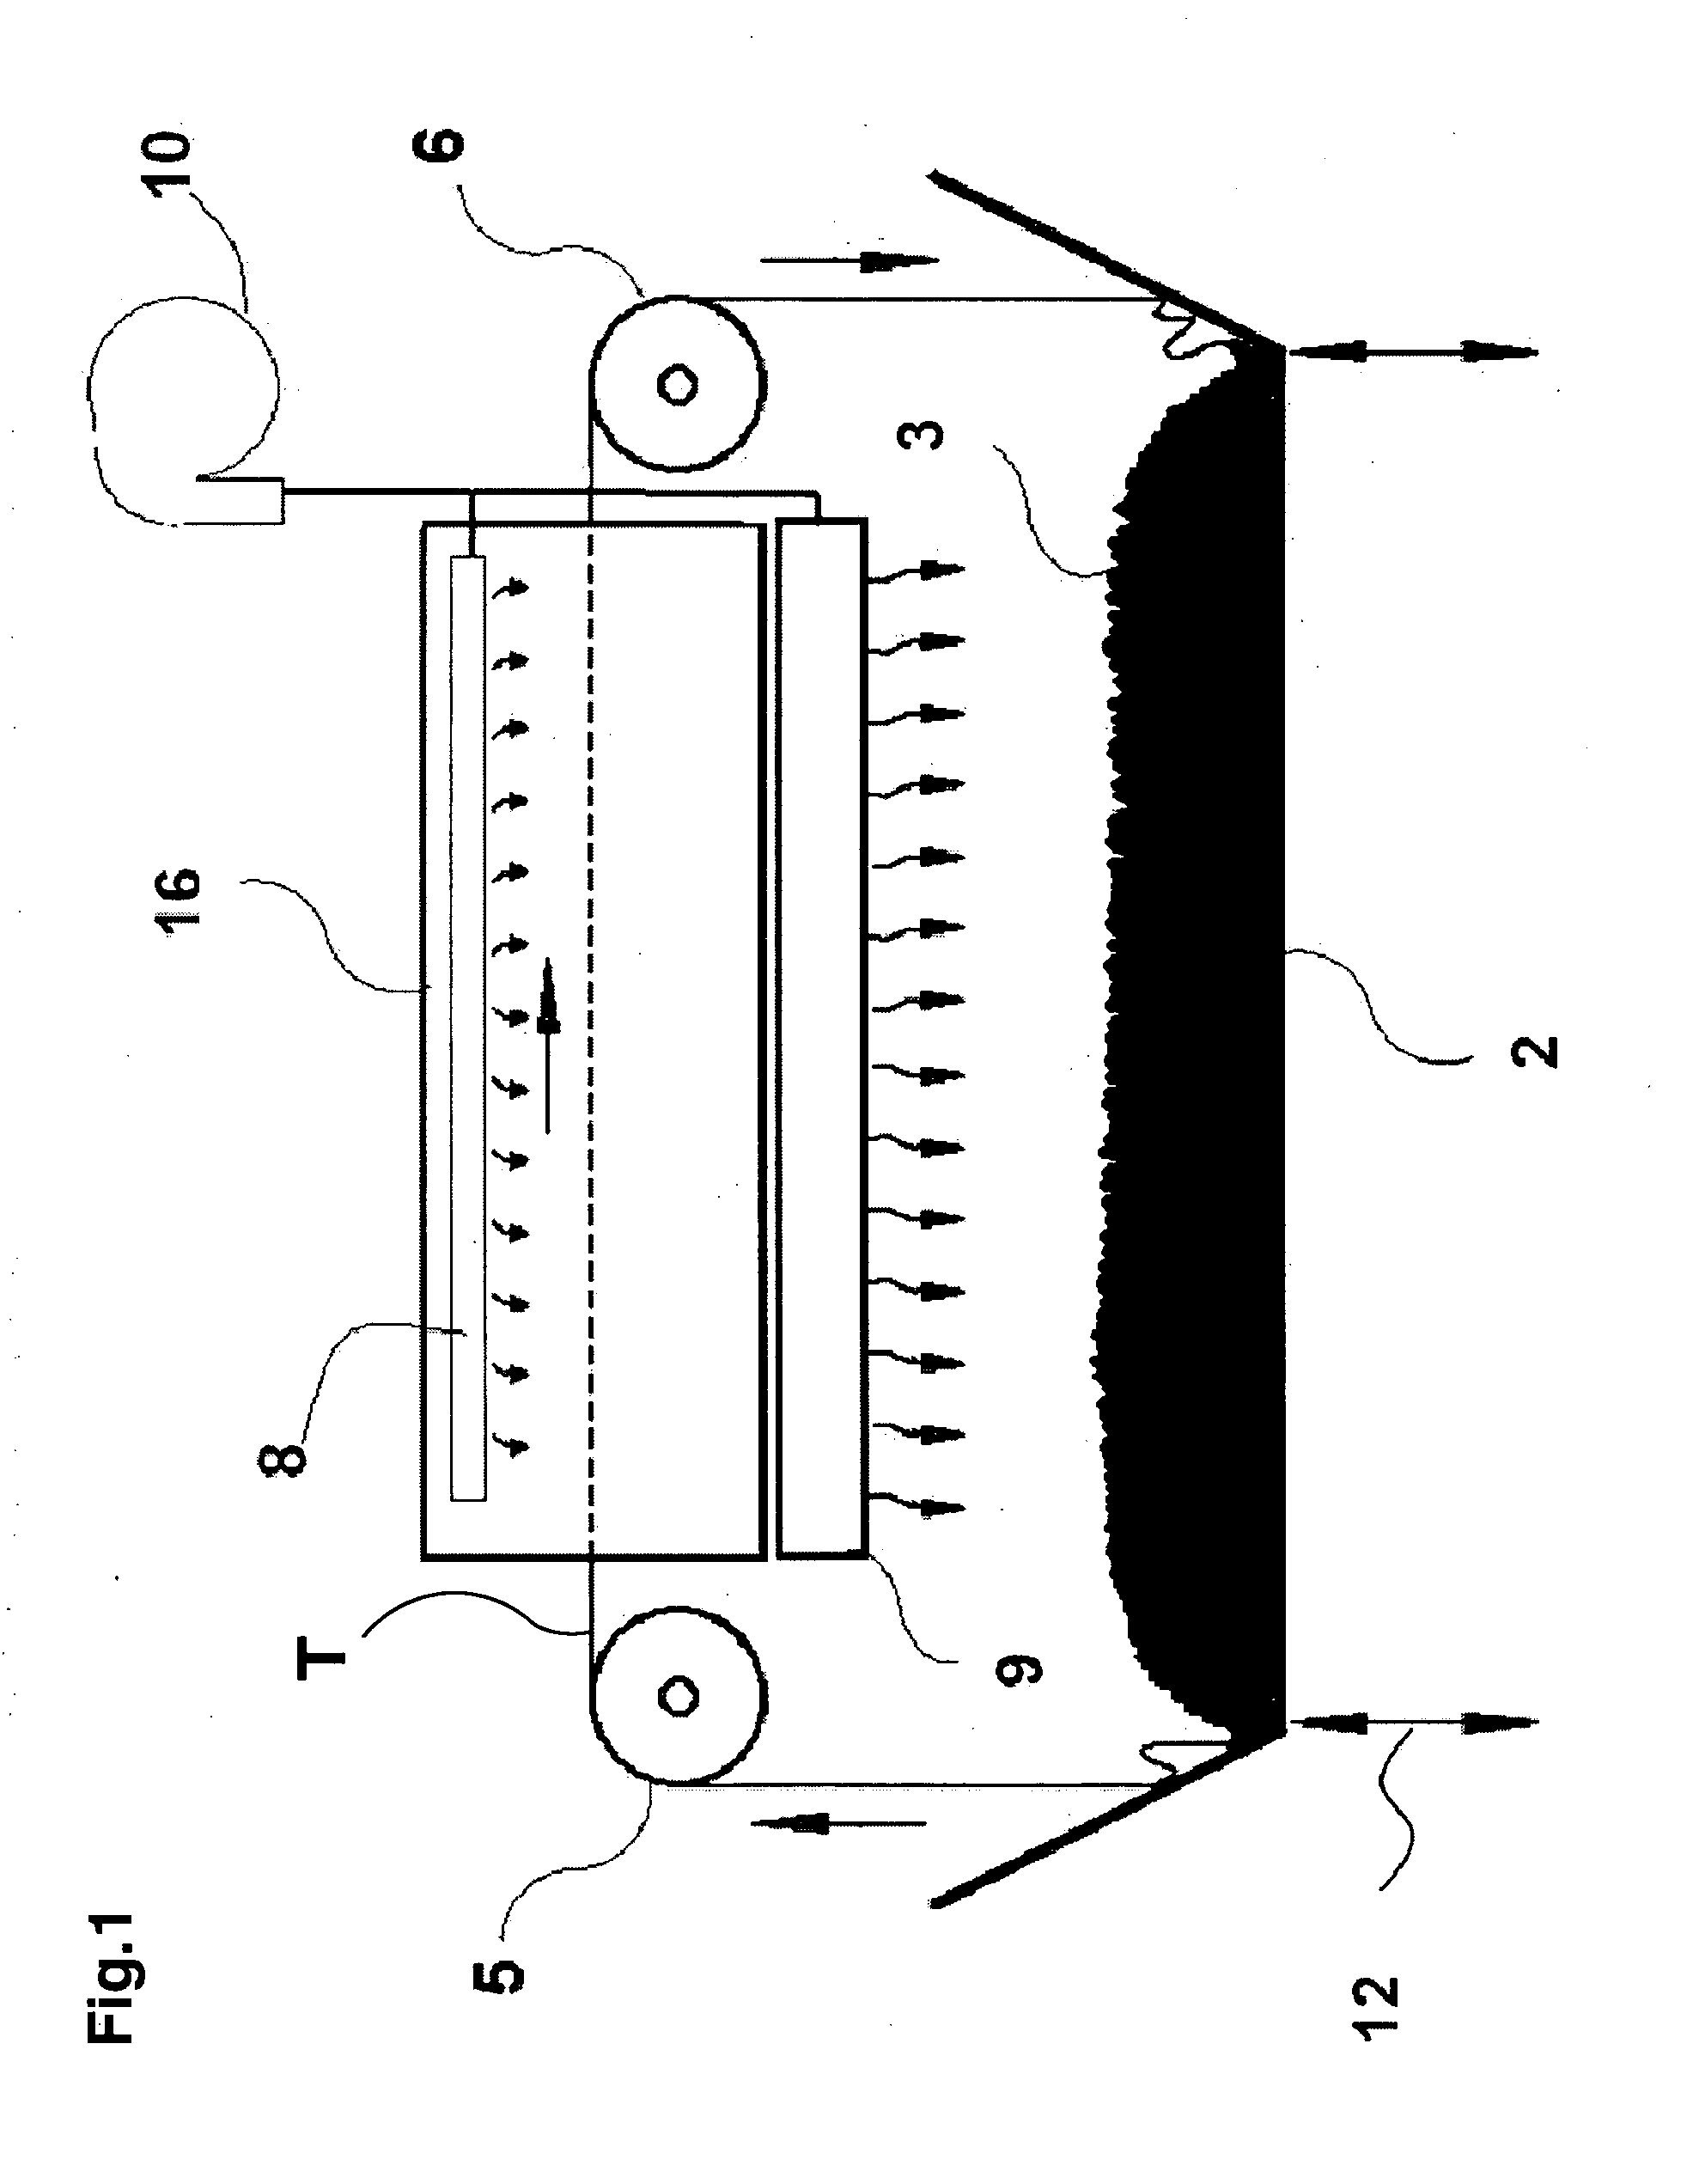 Machine and method for the combined mechanical and heat treatment of fabrics, especially knitted fabrics